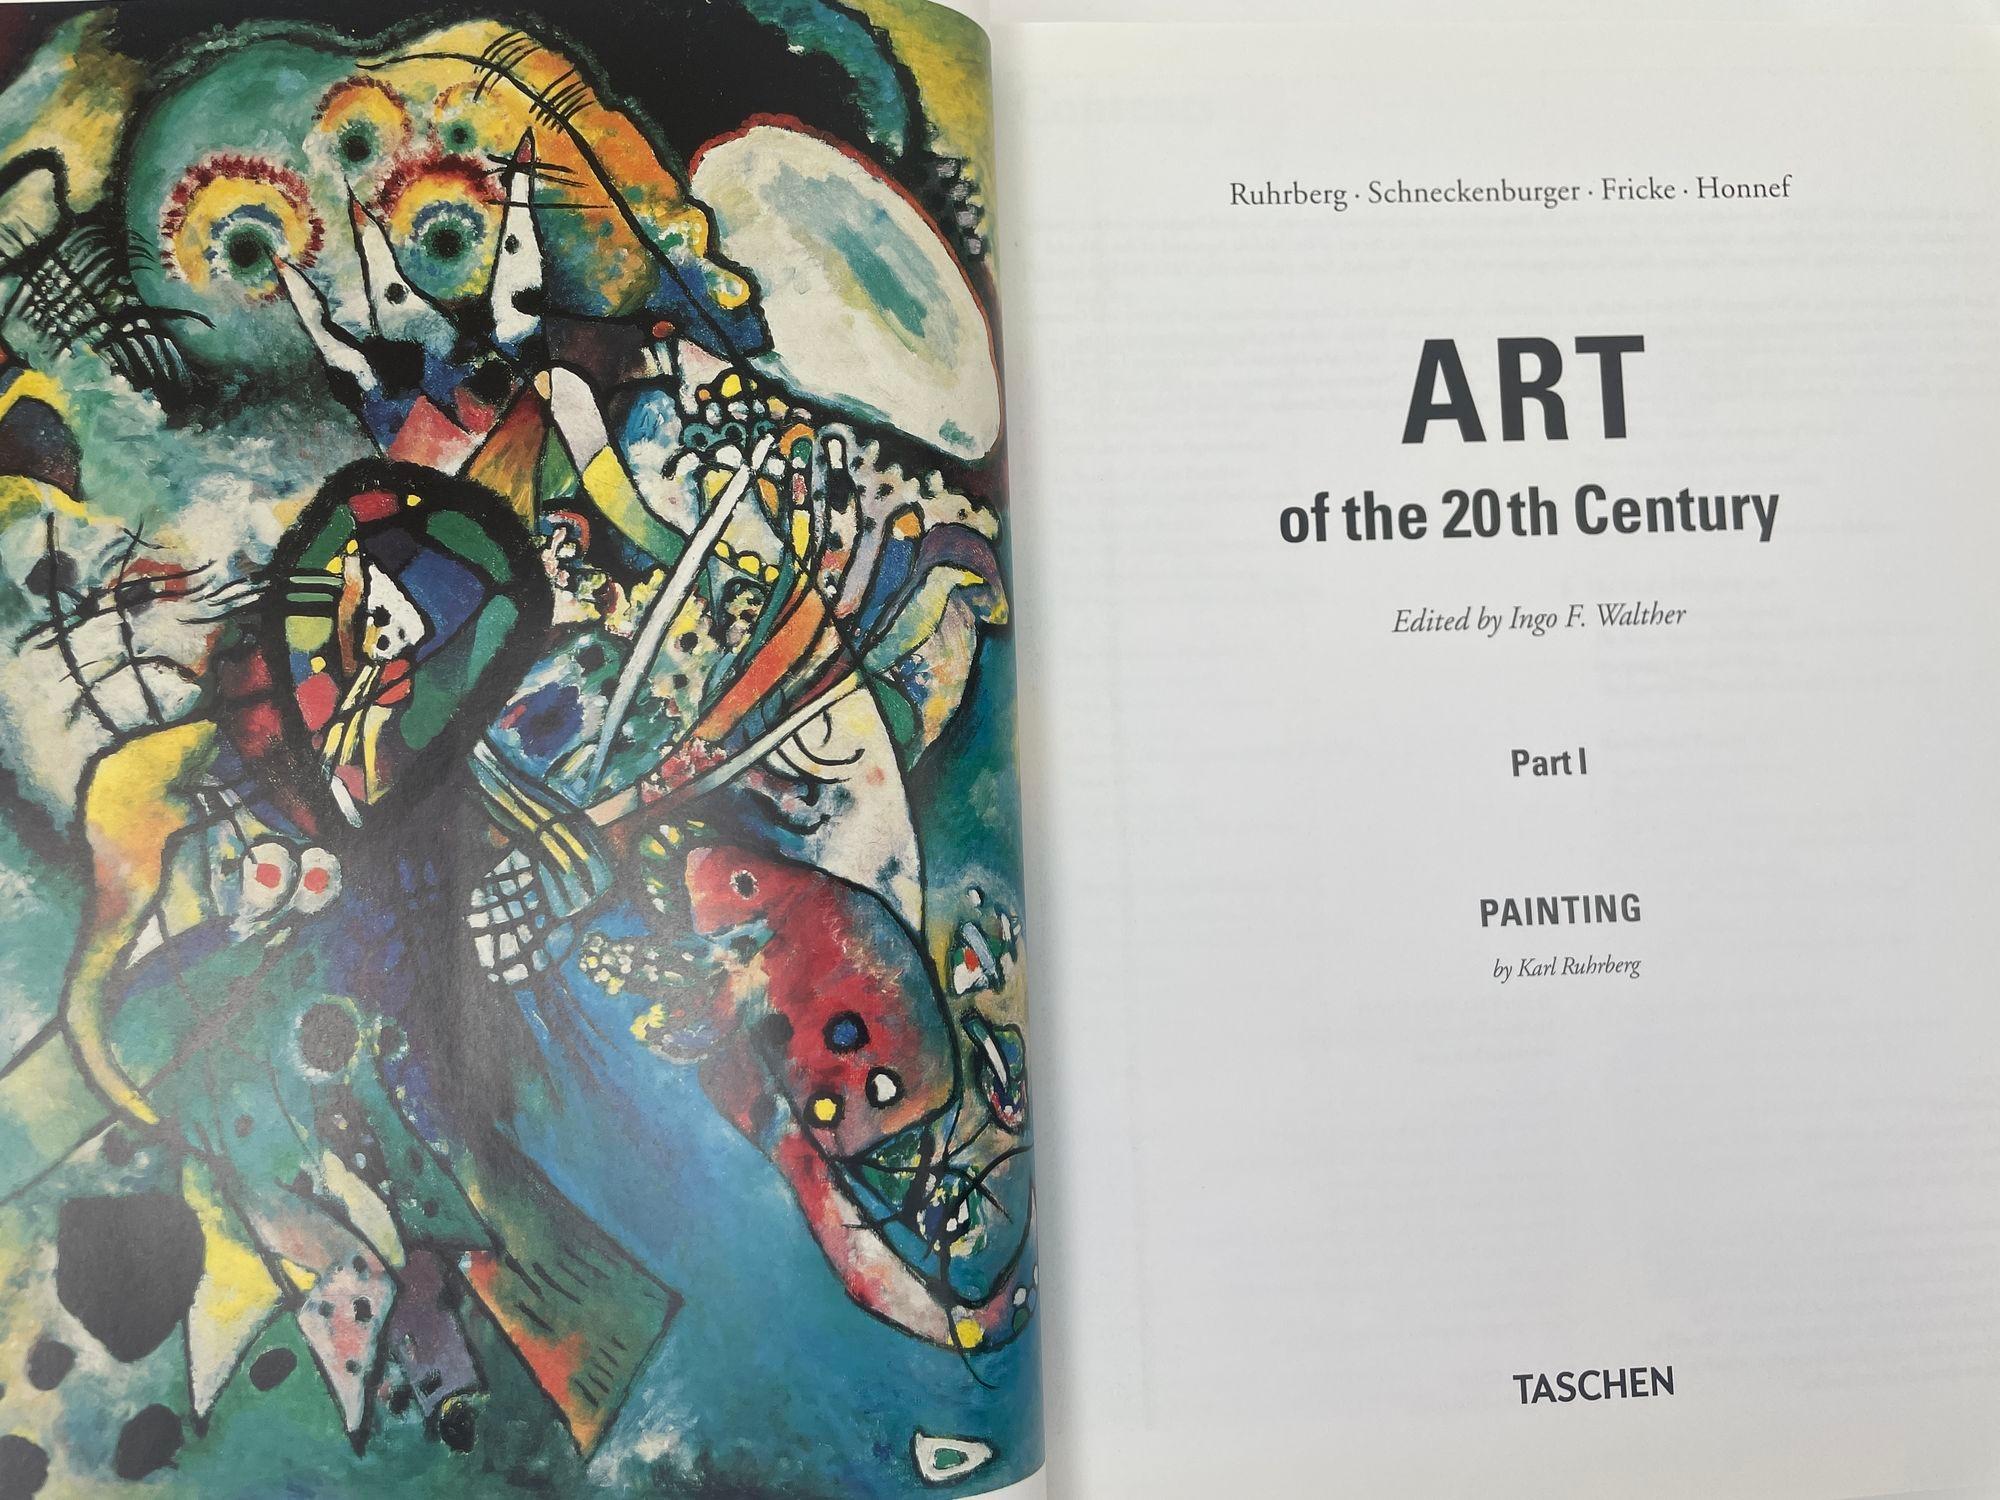 Art of the 20th Century Vol. I Hardcover Taschen 2012 For Sale 2